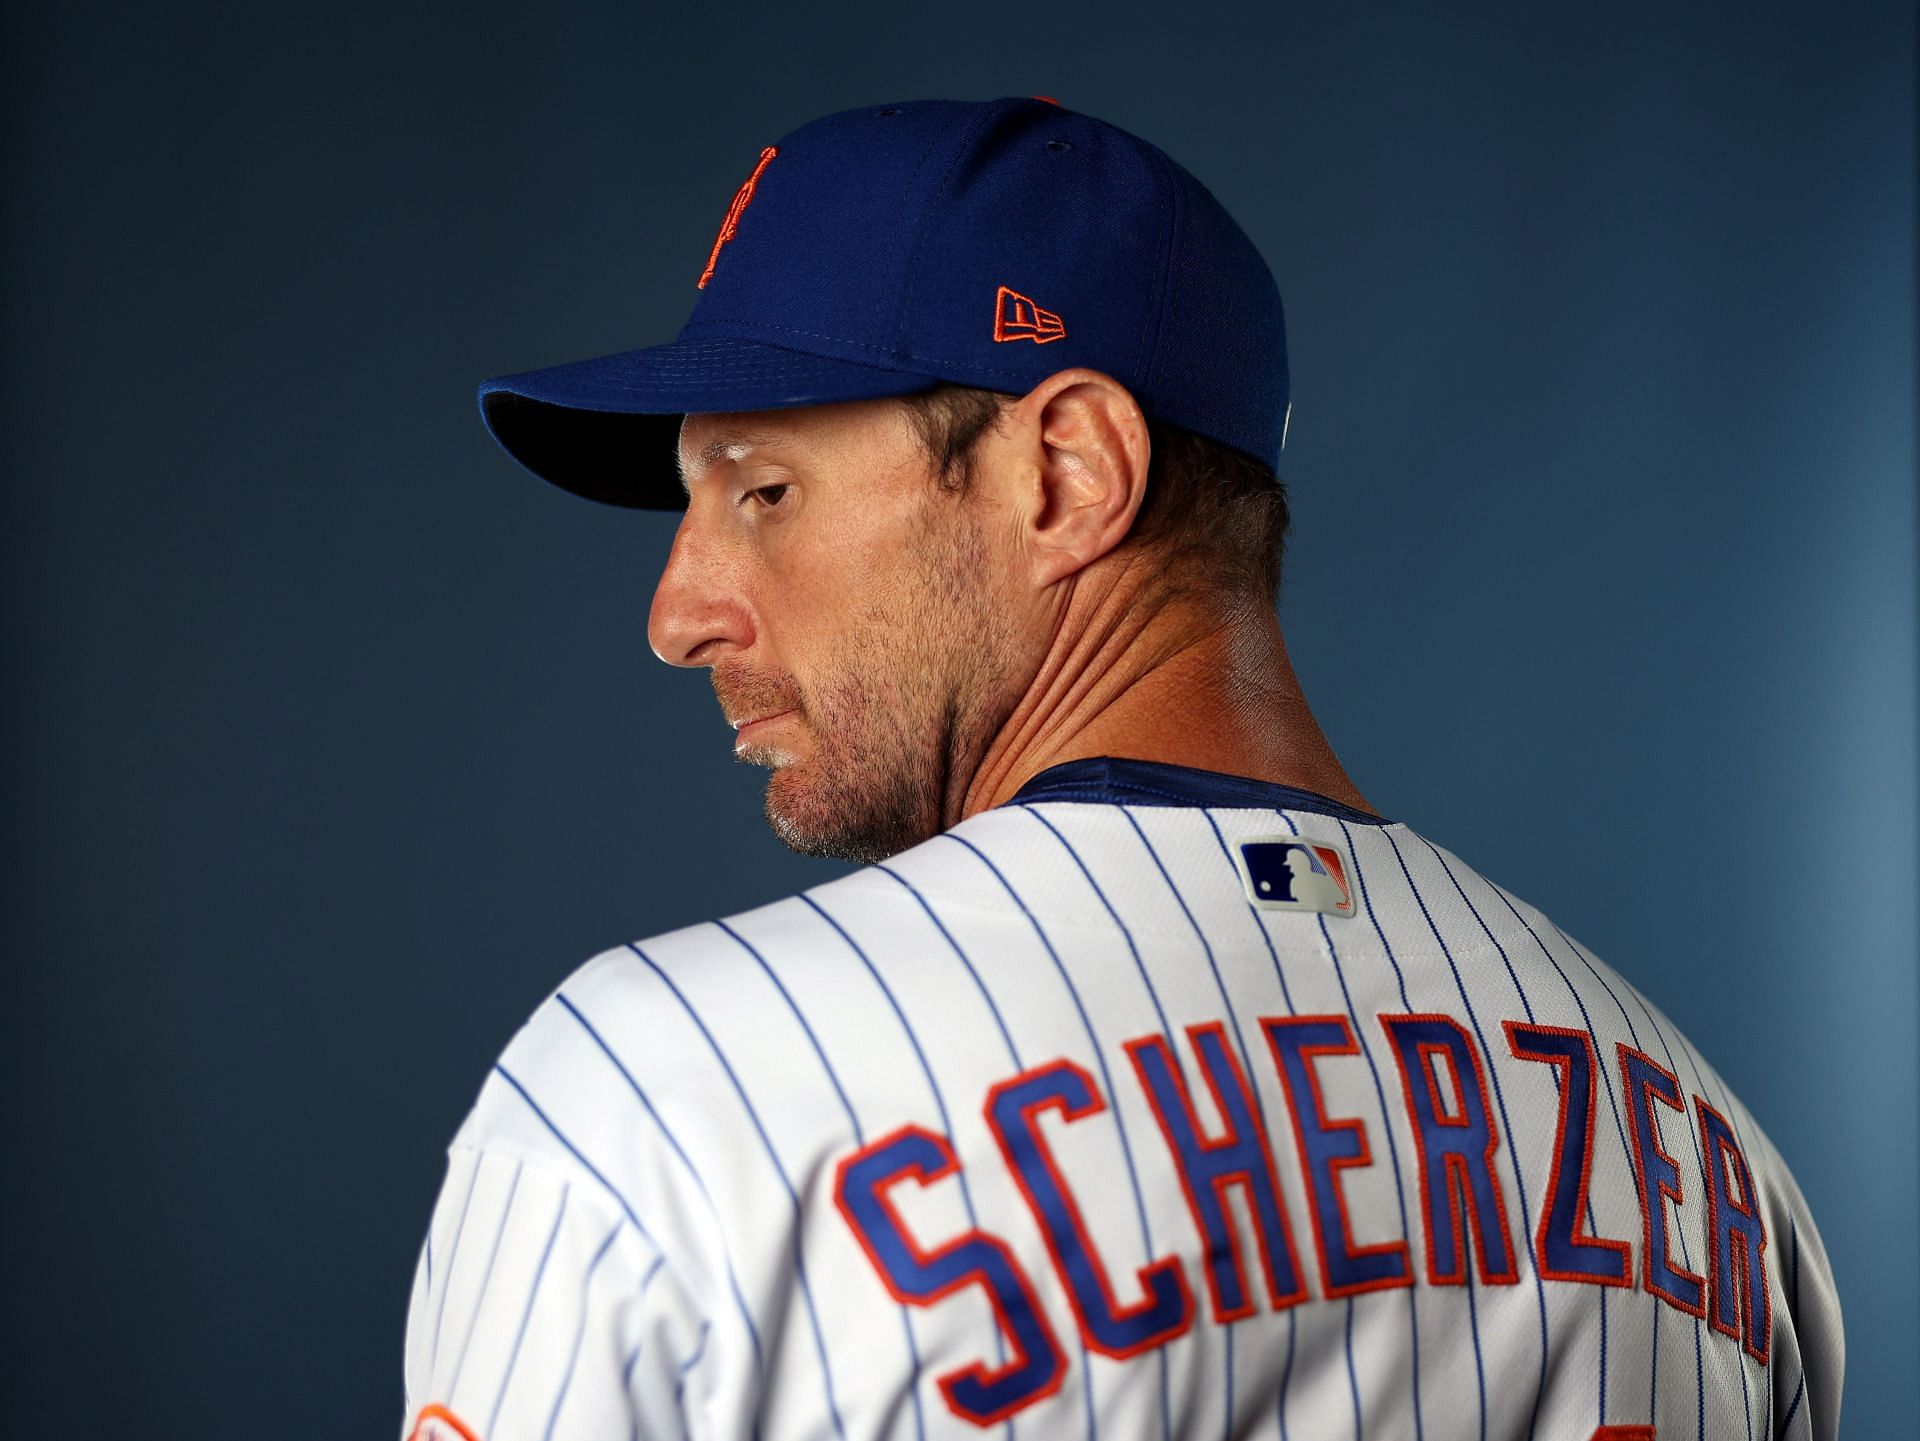 Max Scherzer contract: How much does the ace pitcher earn with the